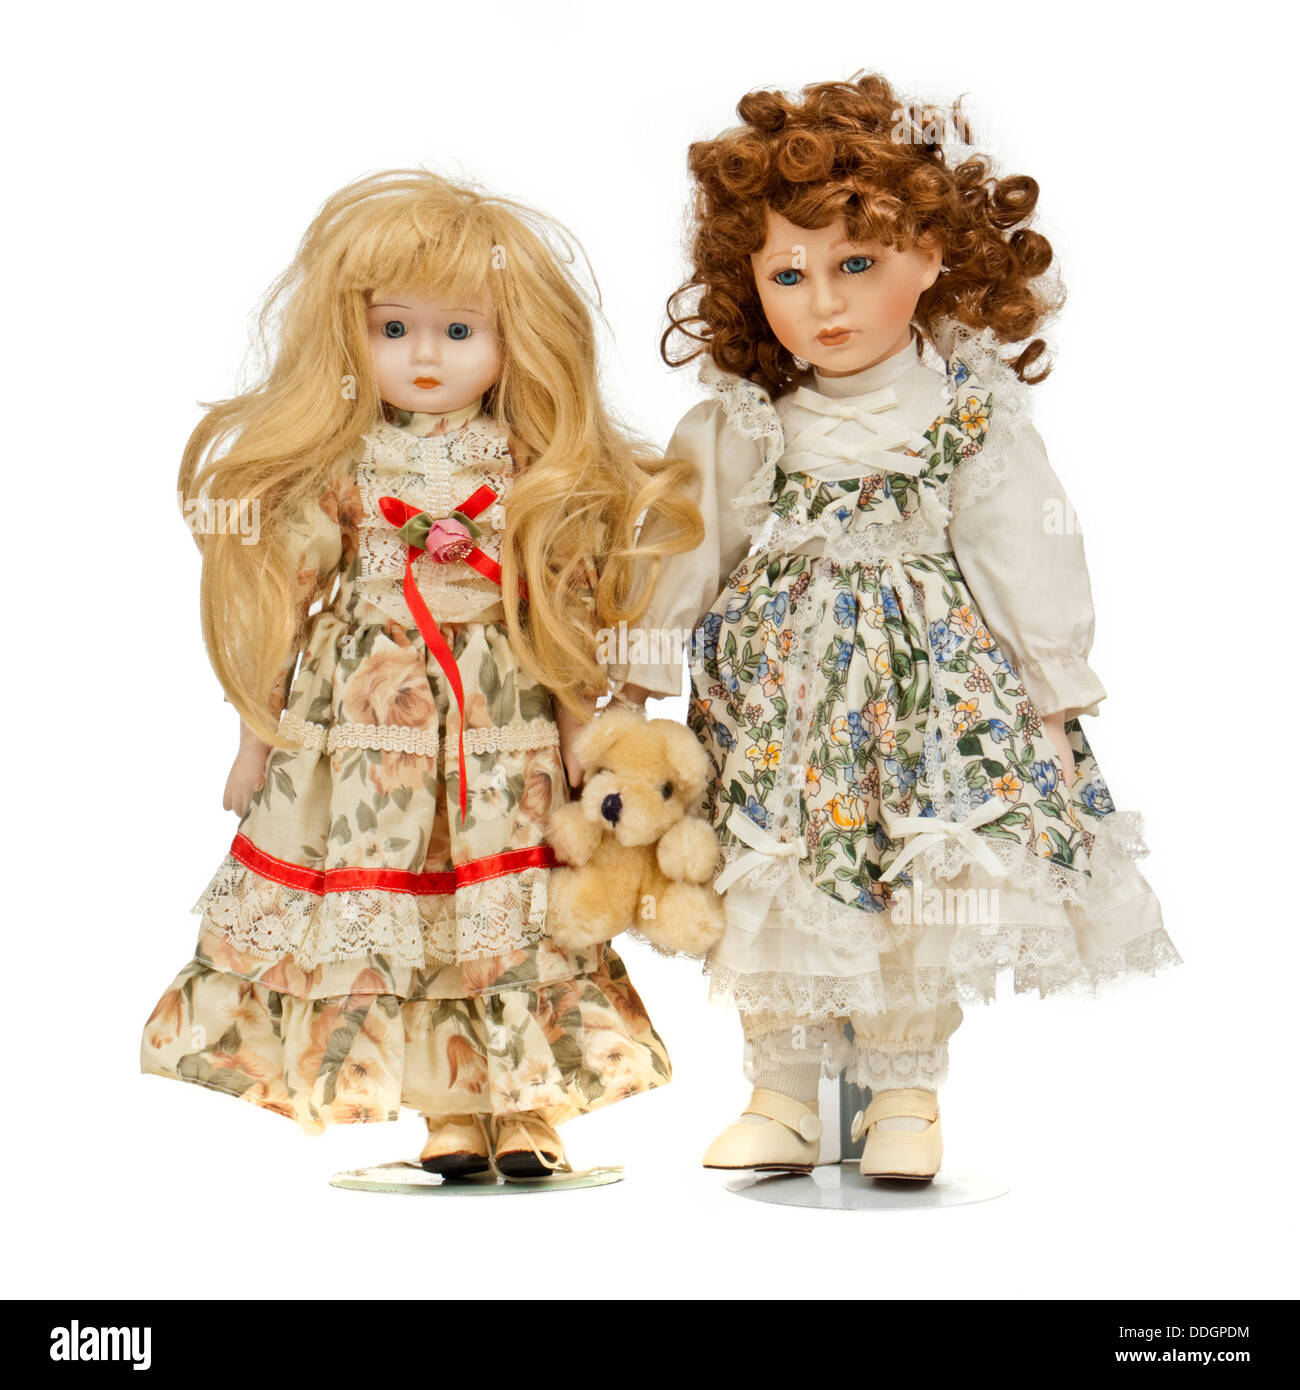 collectable dolls